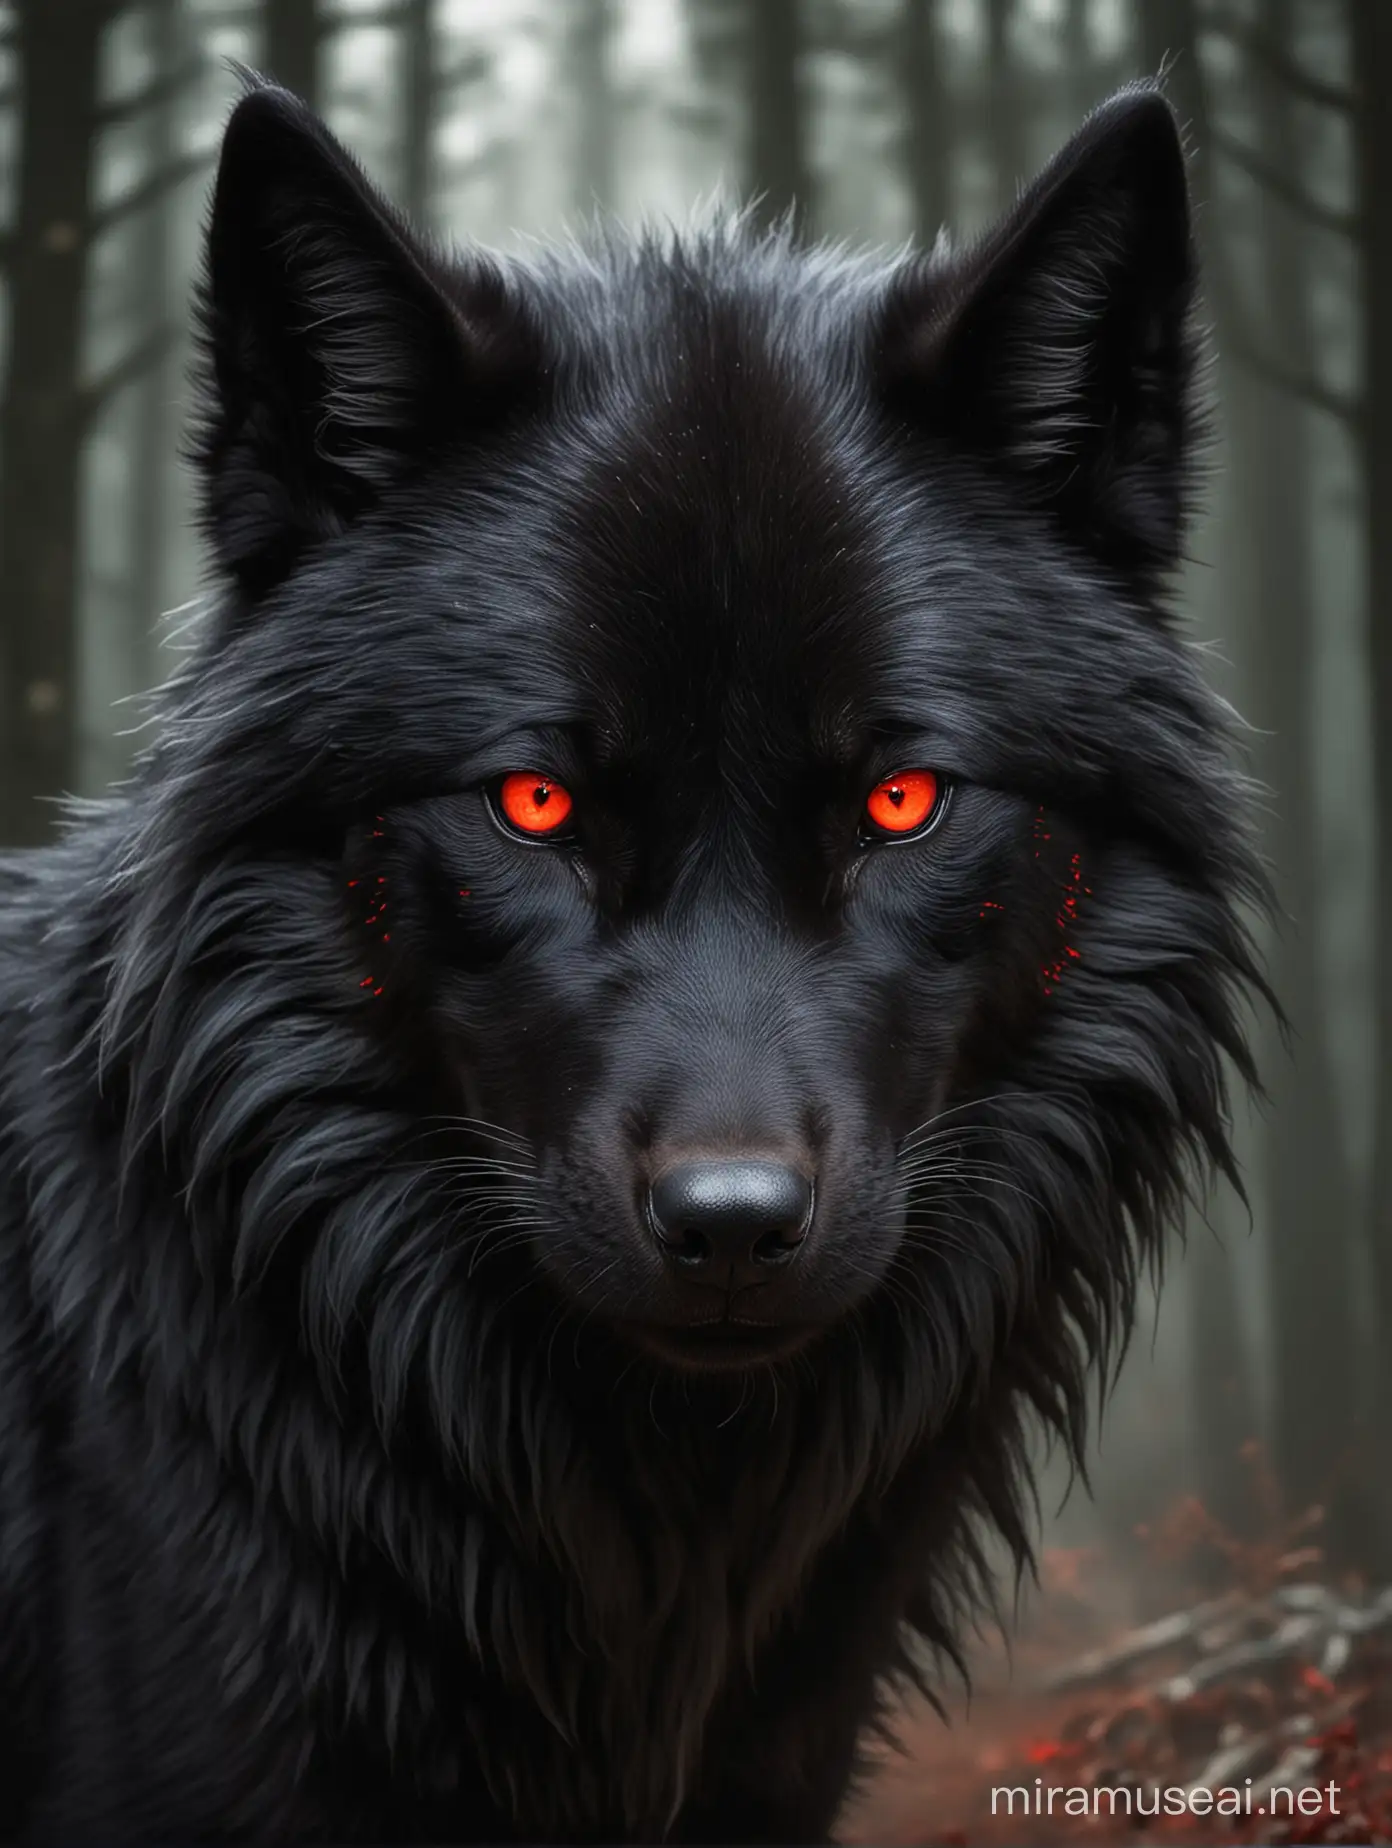 Majestic Black Wolf with Piercing Red Eyes in Moonlight